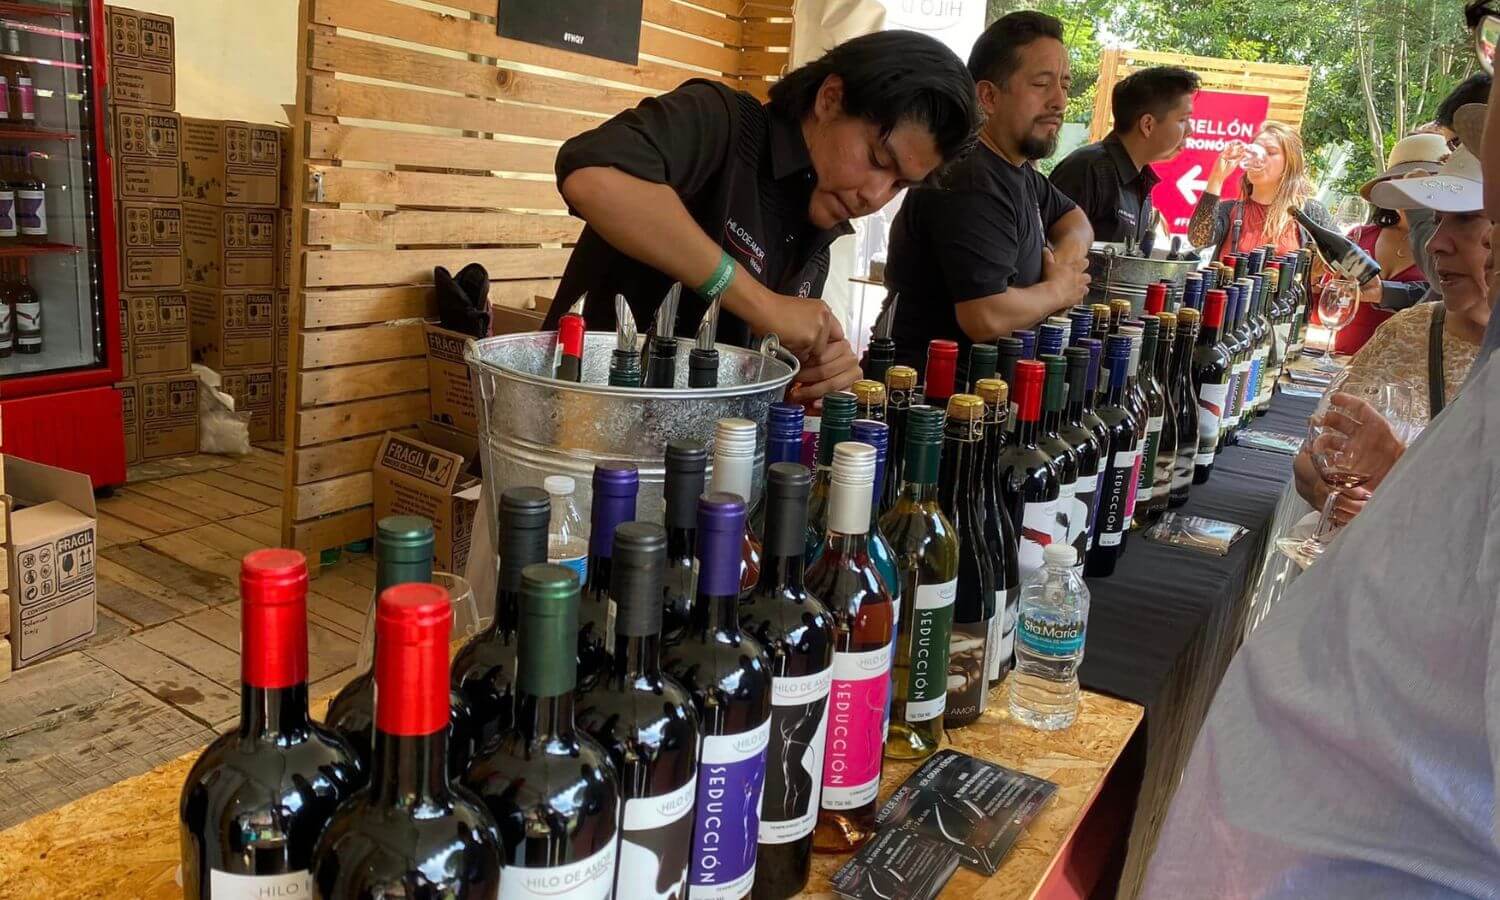 Many bottles of wine being displayed ready for tasting at the wine and cheese festival in Tequisquiapan.